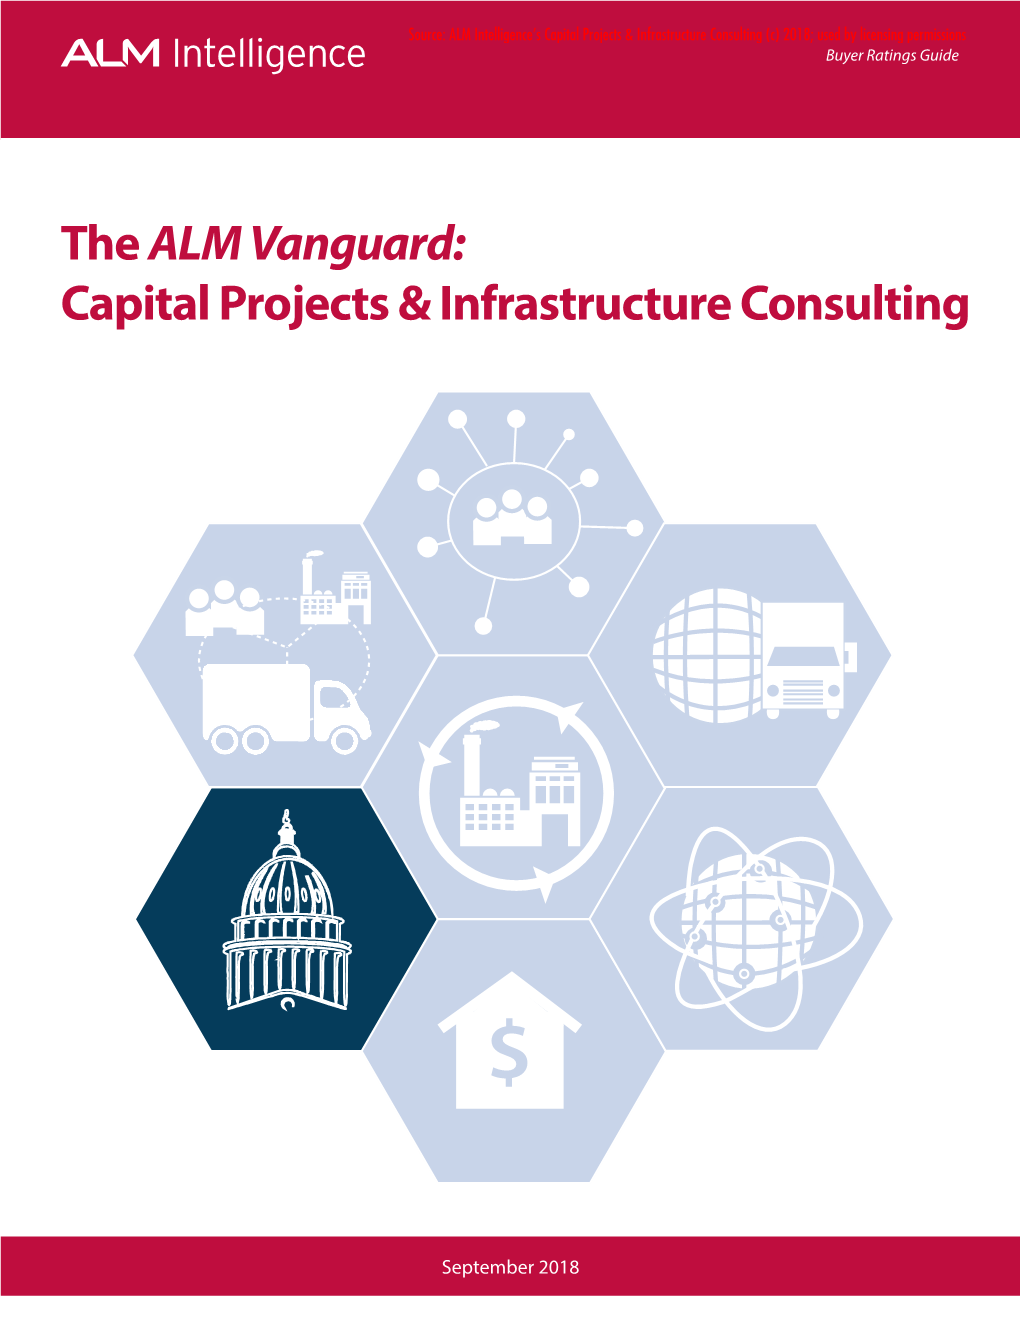 The ALM Vanguard: Capital Projects & Infrastructure Consulting